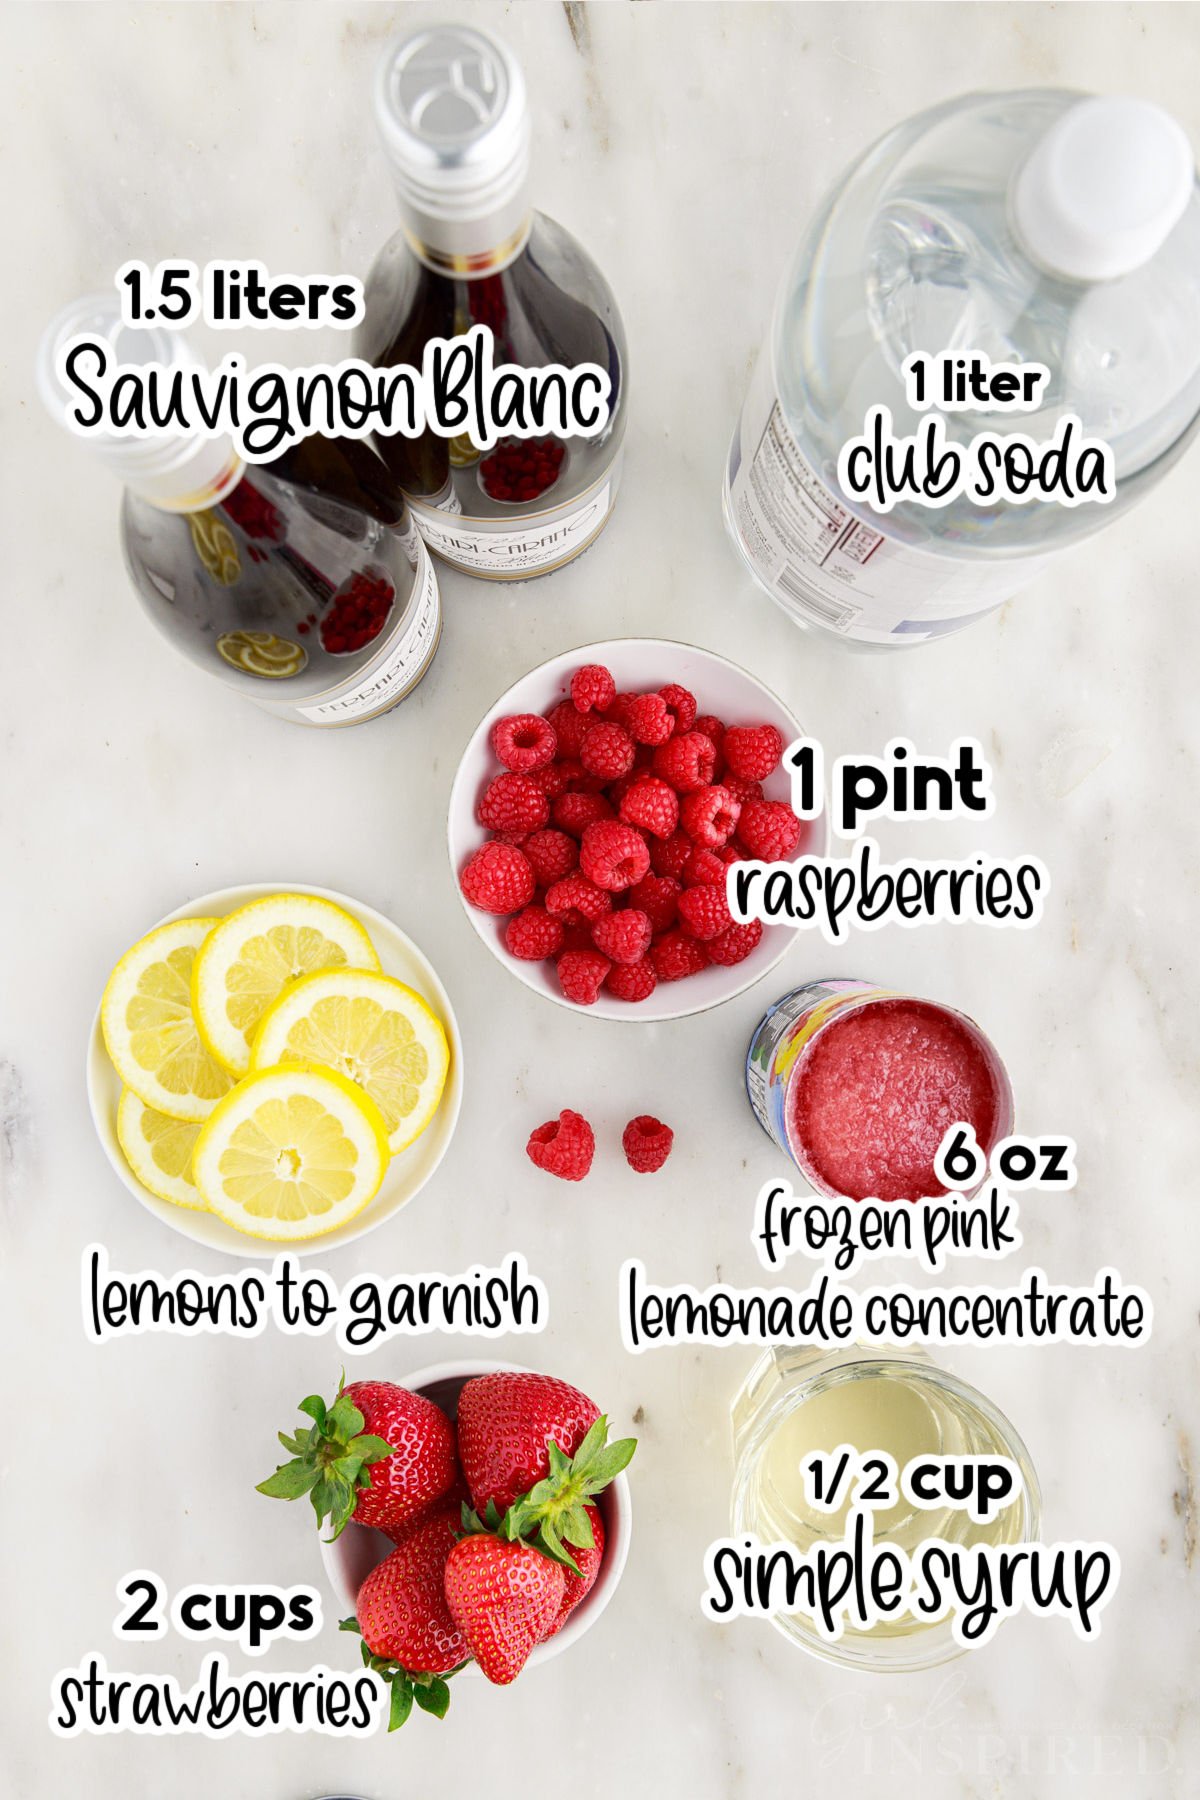 Individual ingredients for Strawberry Sangria with text labels.